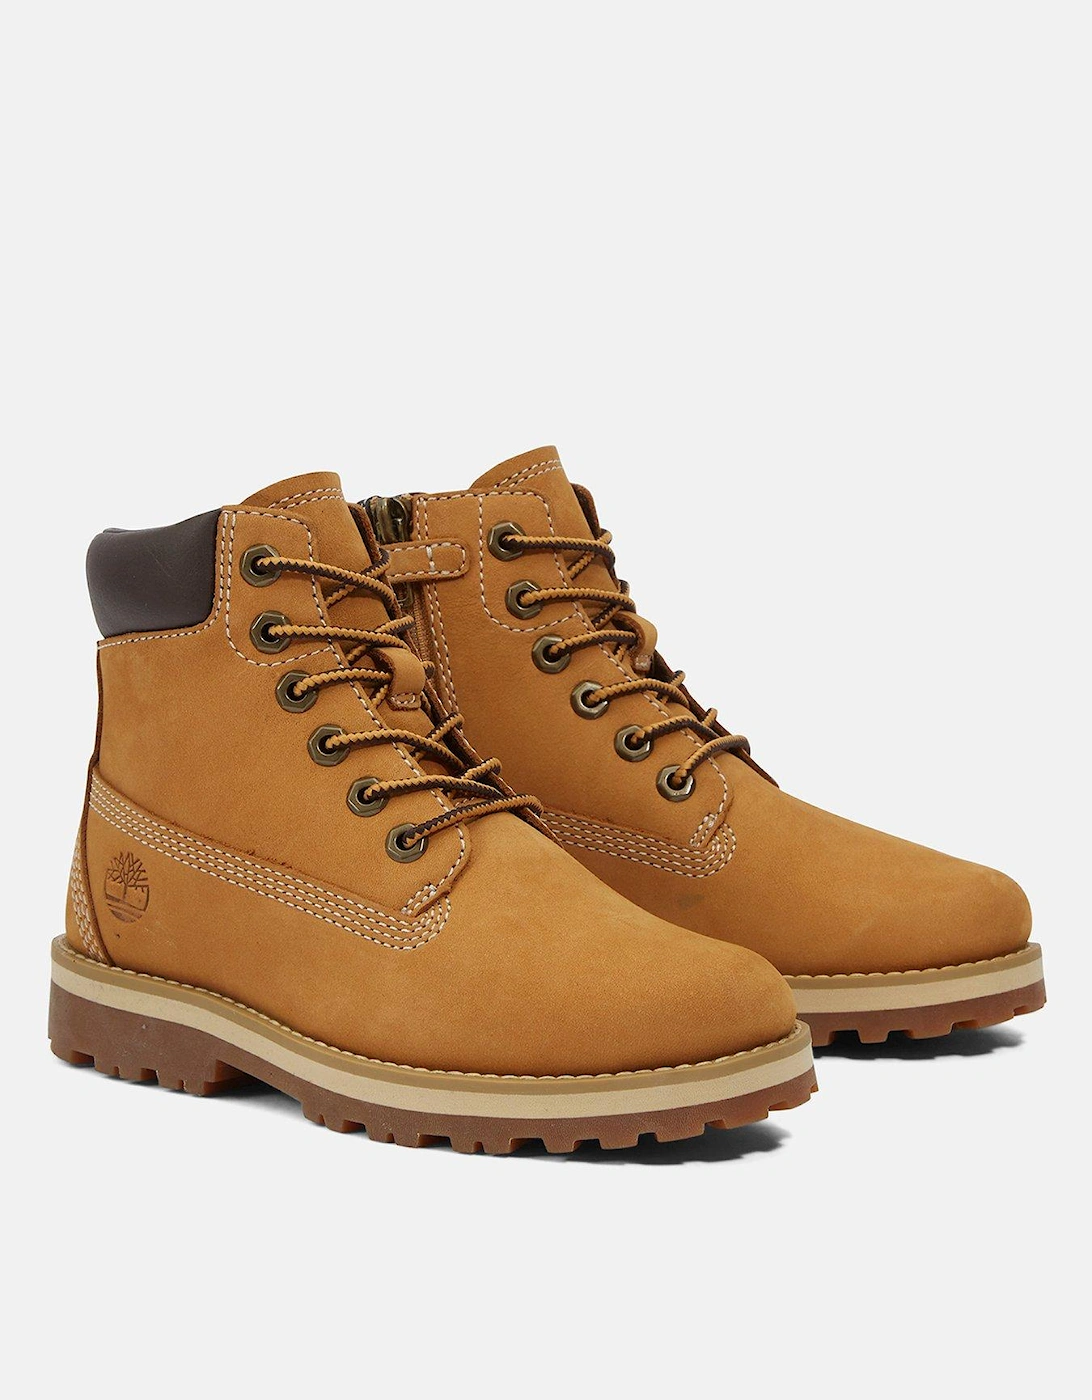 Courma Kid Leather Traditional6In Boot